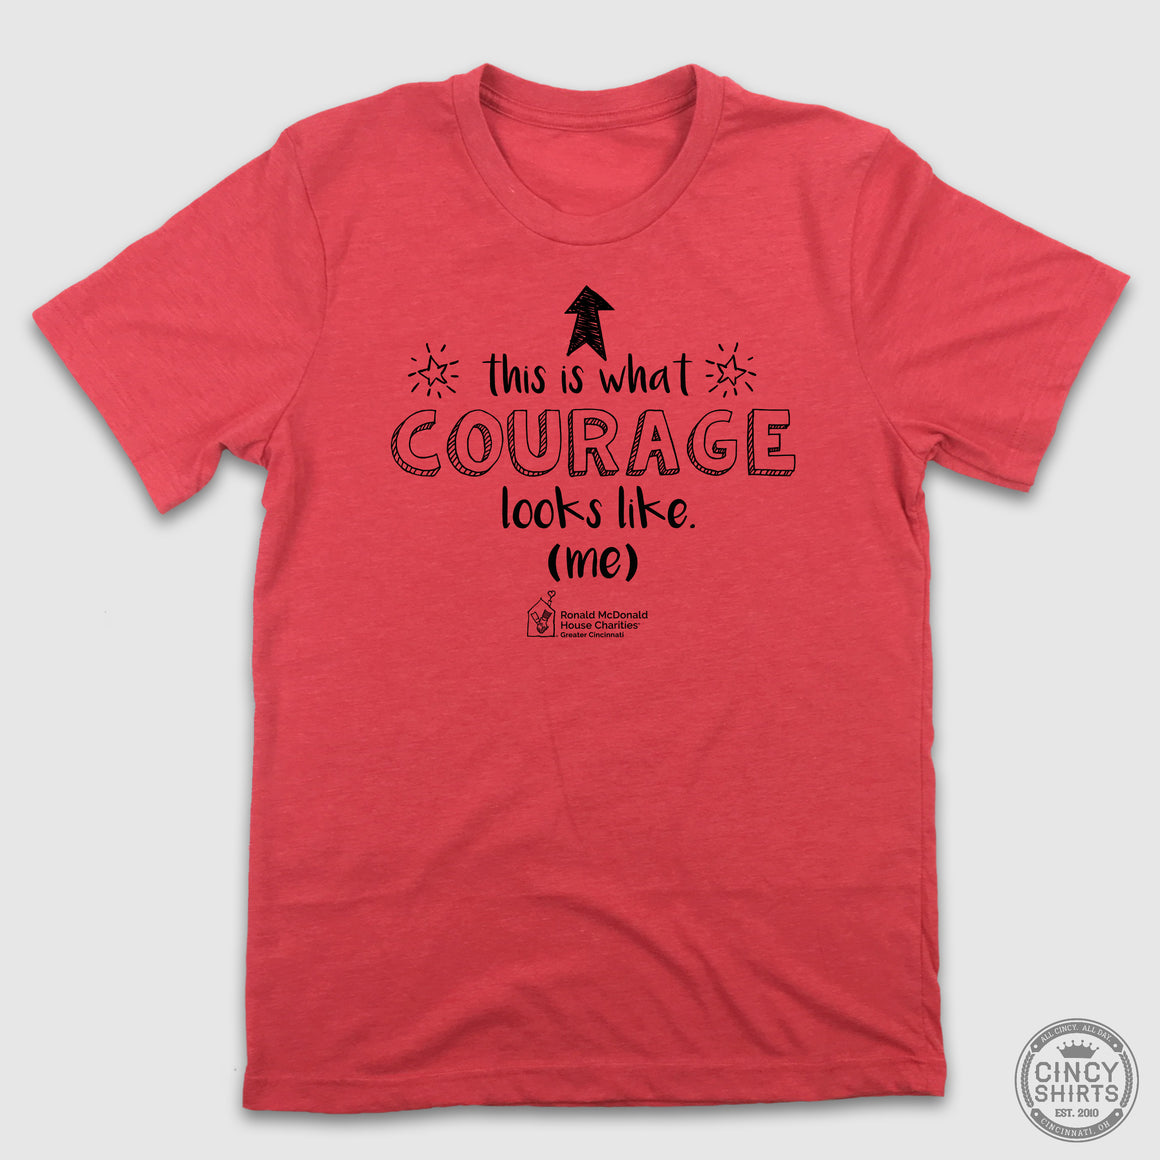 This Is What Courage Looks Like - Ronald McDonald House - Cincy Shirts